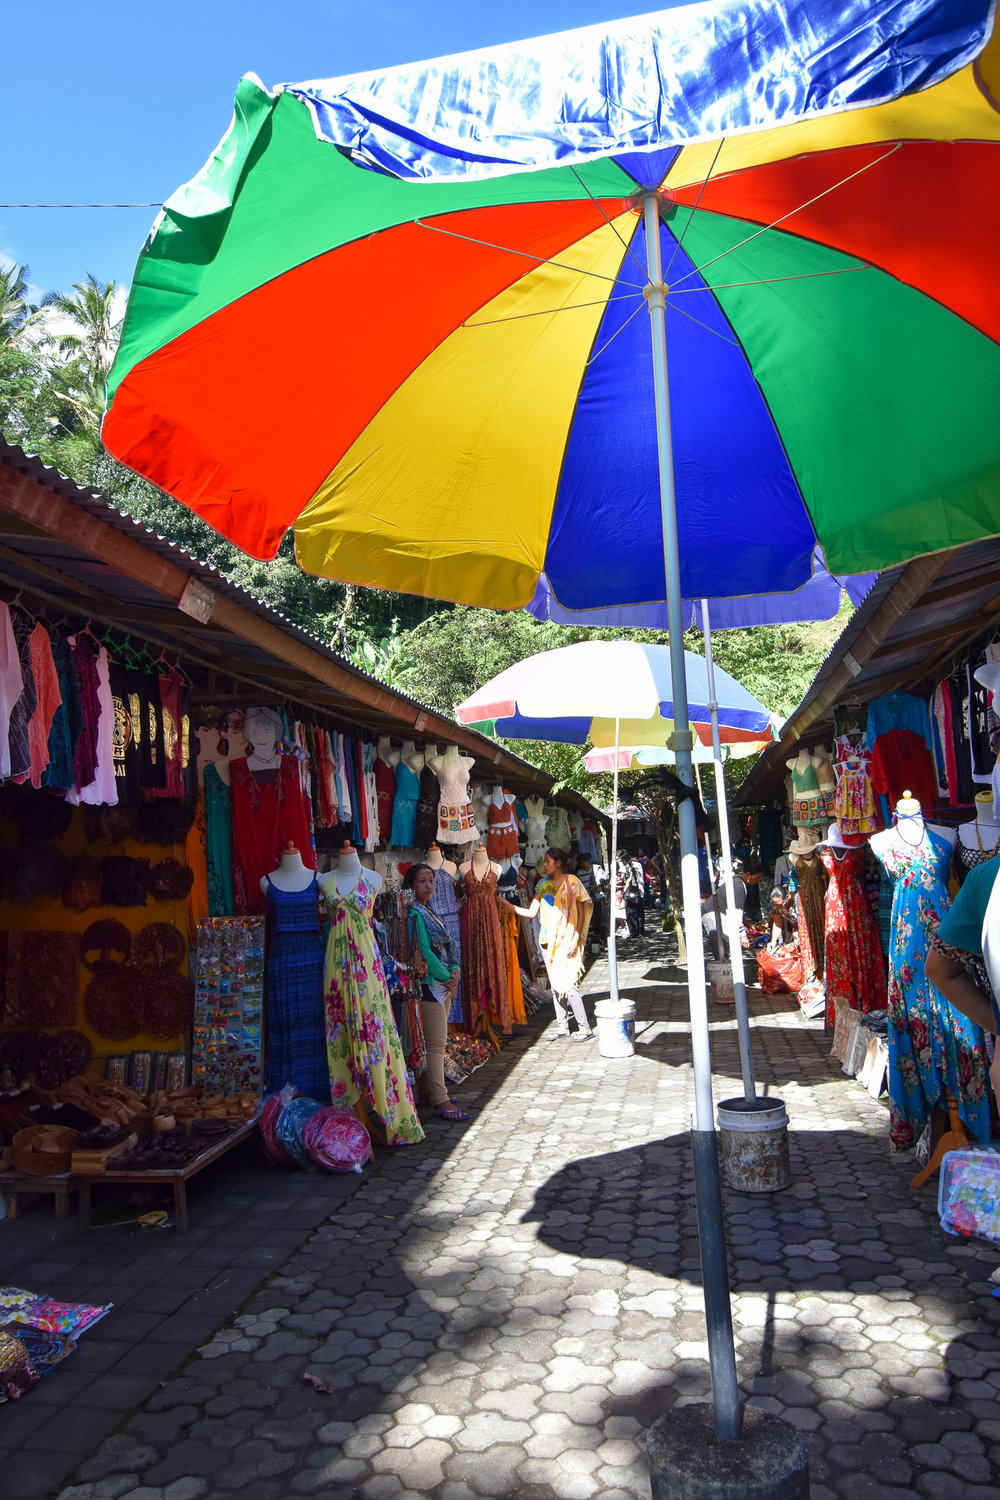  Outside this temple is a market full of vendors selling all kinds of Balinese stuff like clothes, jewelry, bags, etc. 